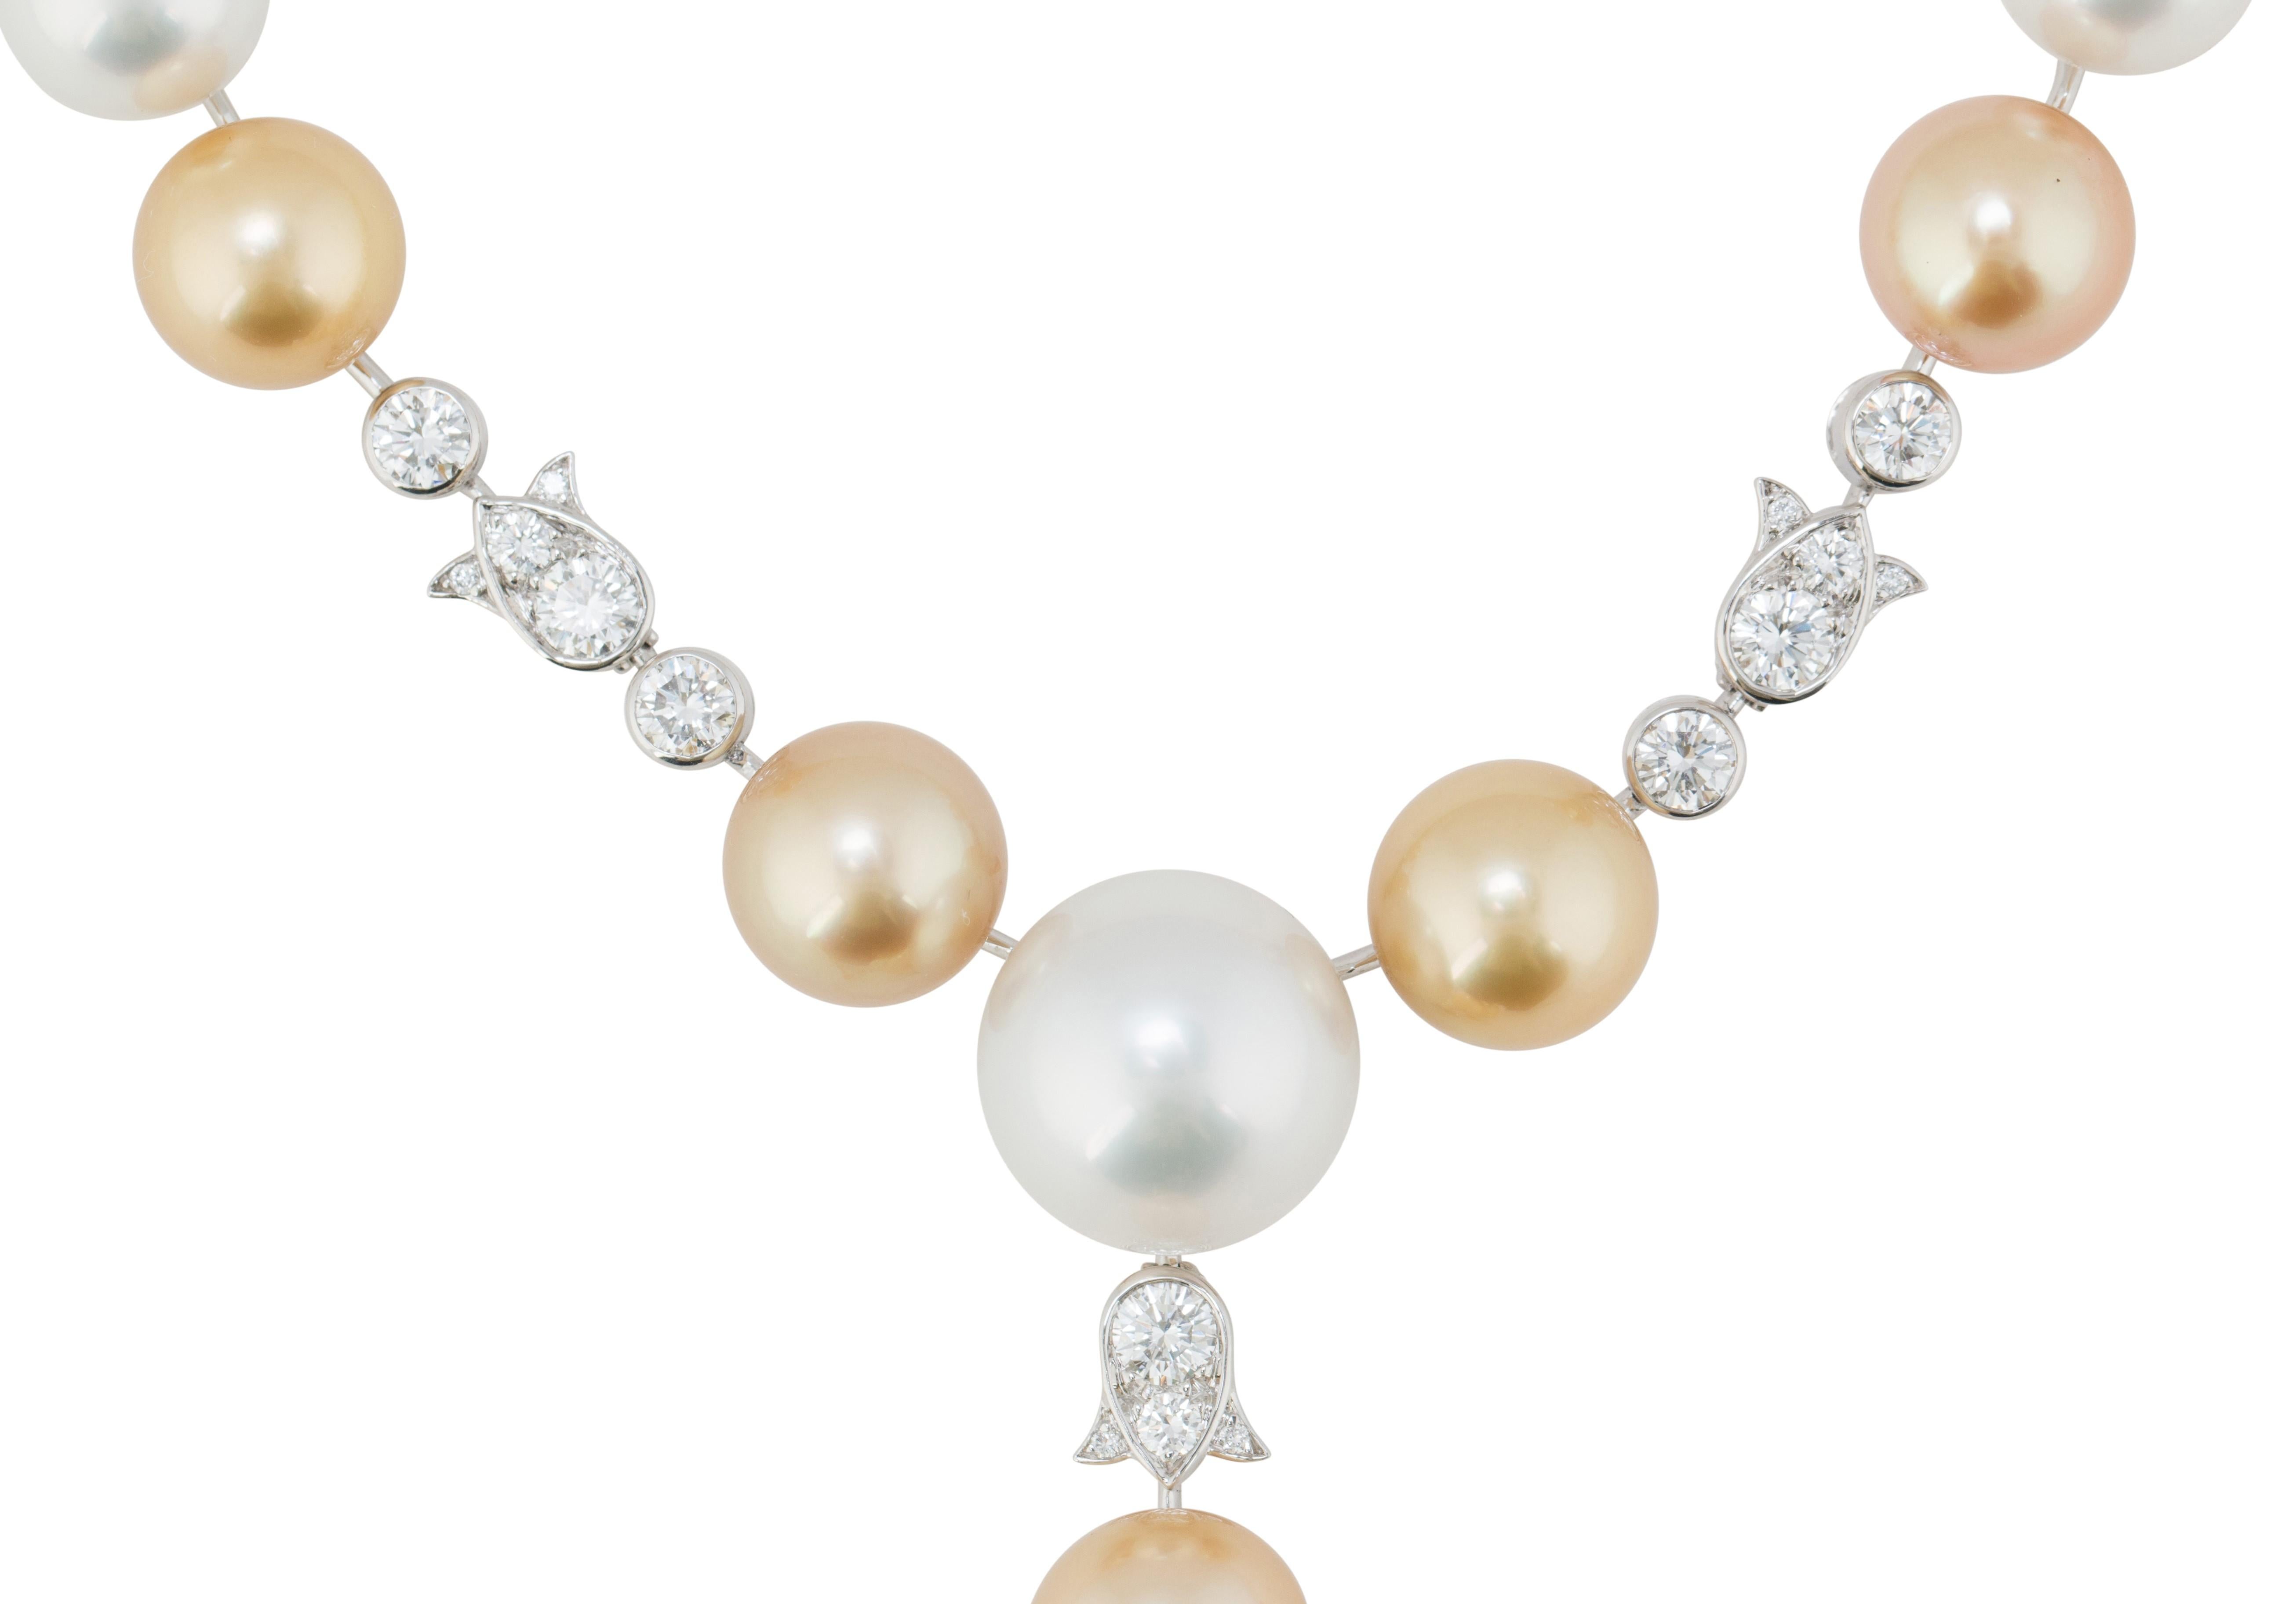 Brilliant Cut Cartier High Jewelry Platinum Diamond and Pearl Necklace